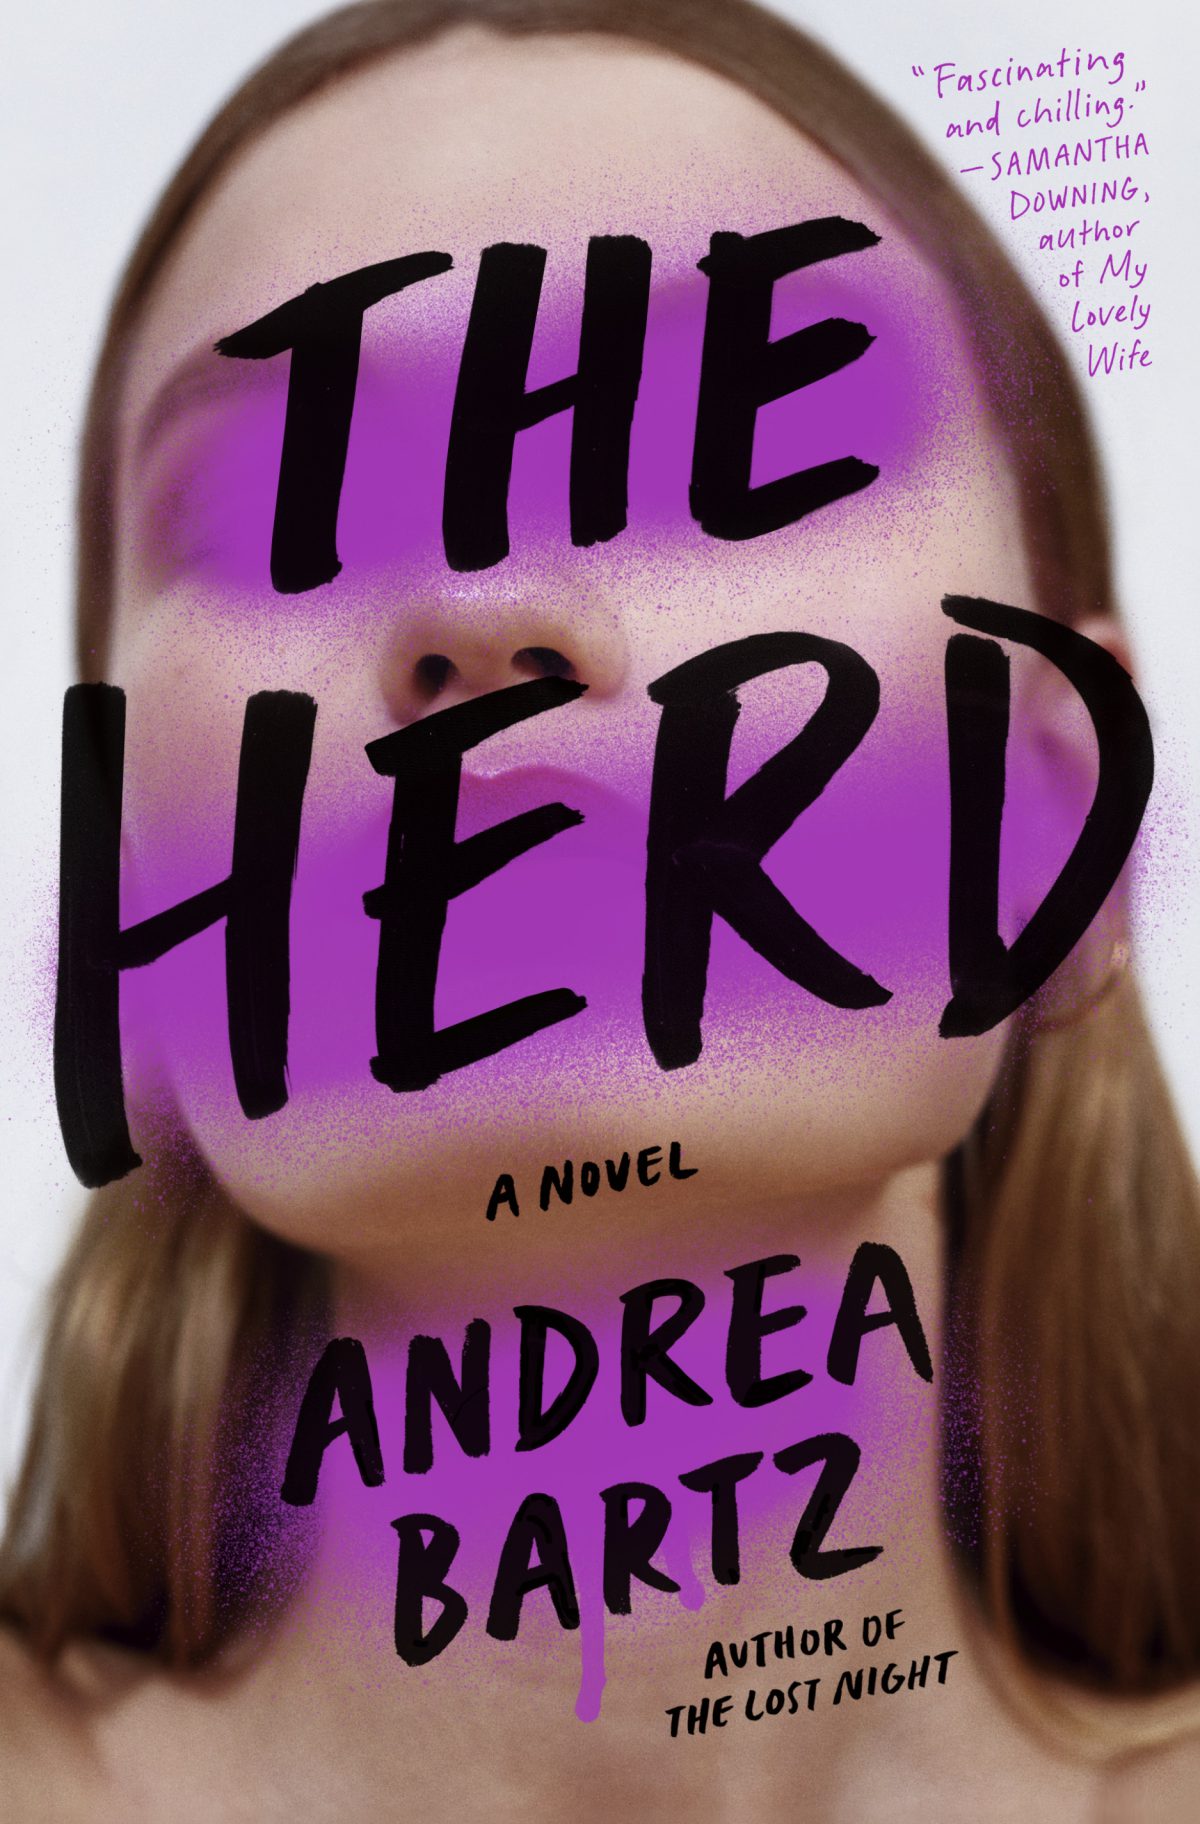 Cover of "The Herd" by Andrea Bartz.